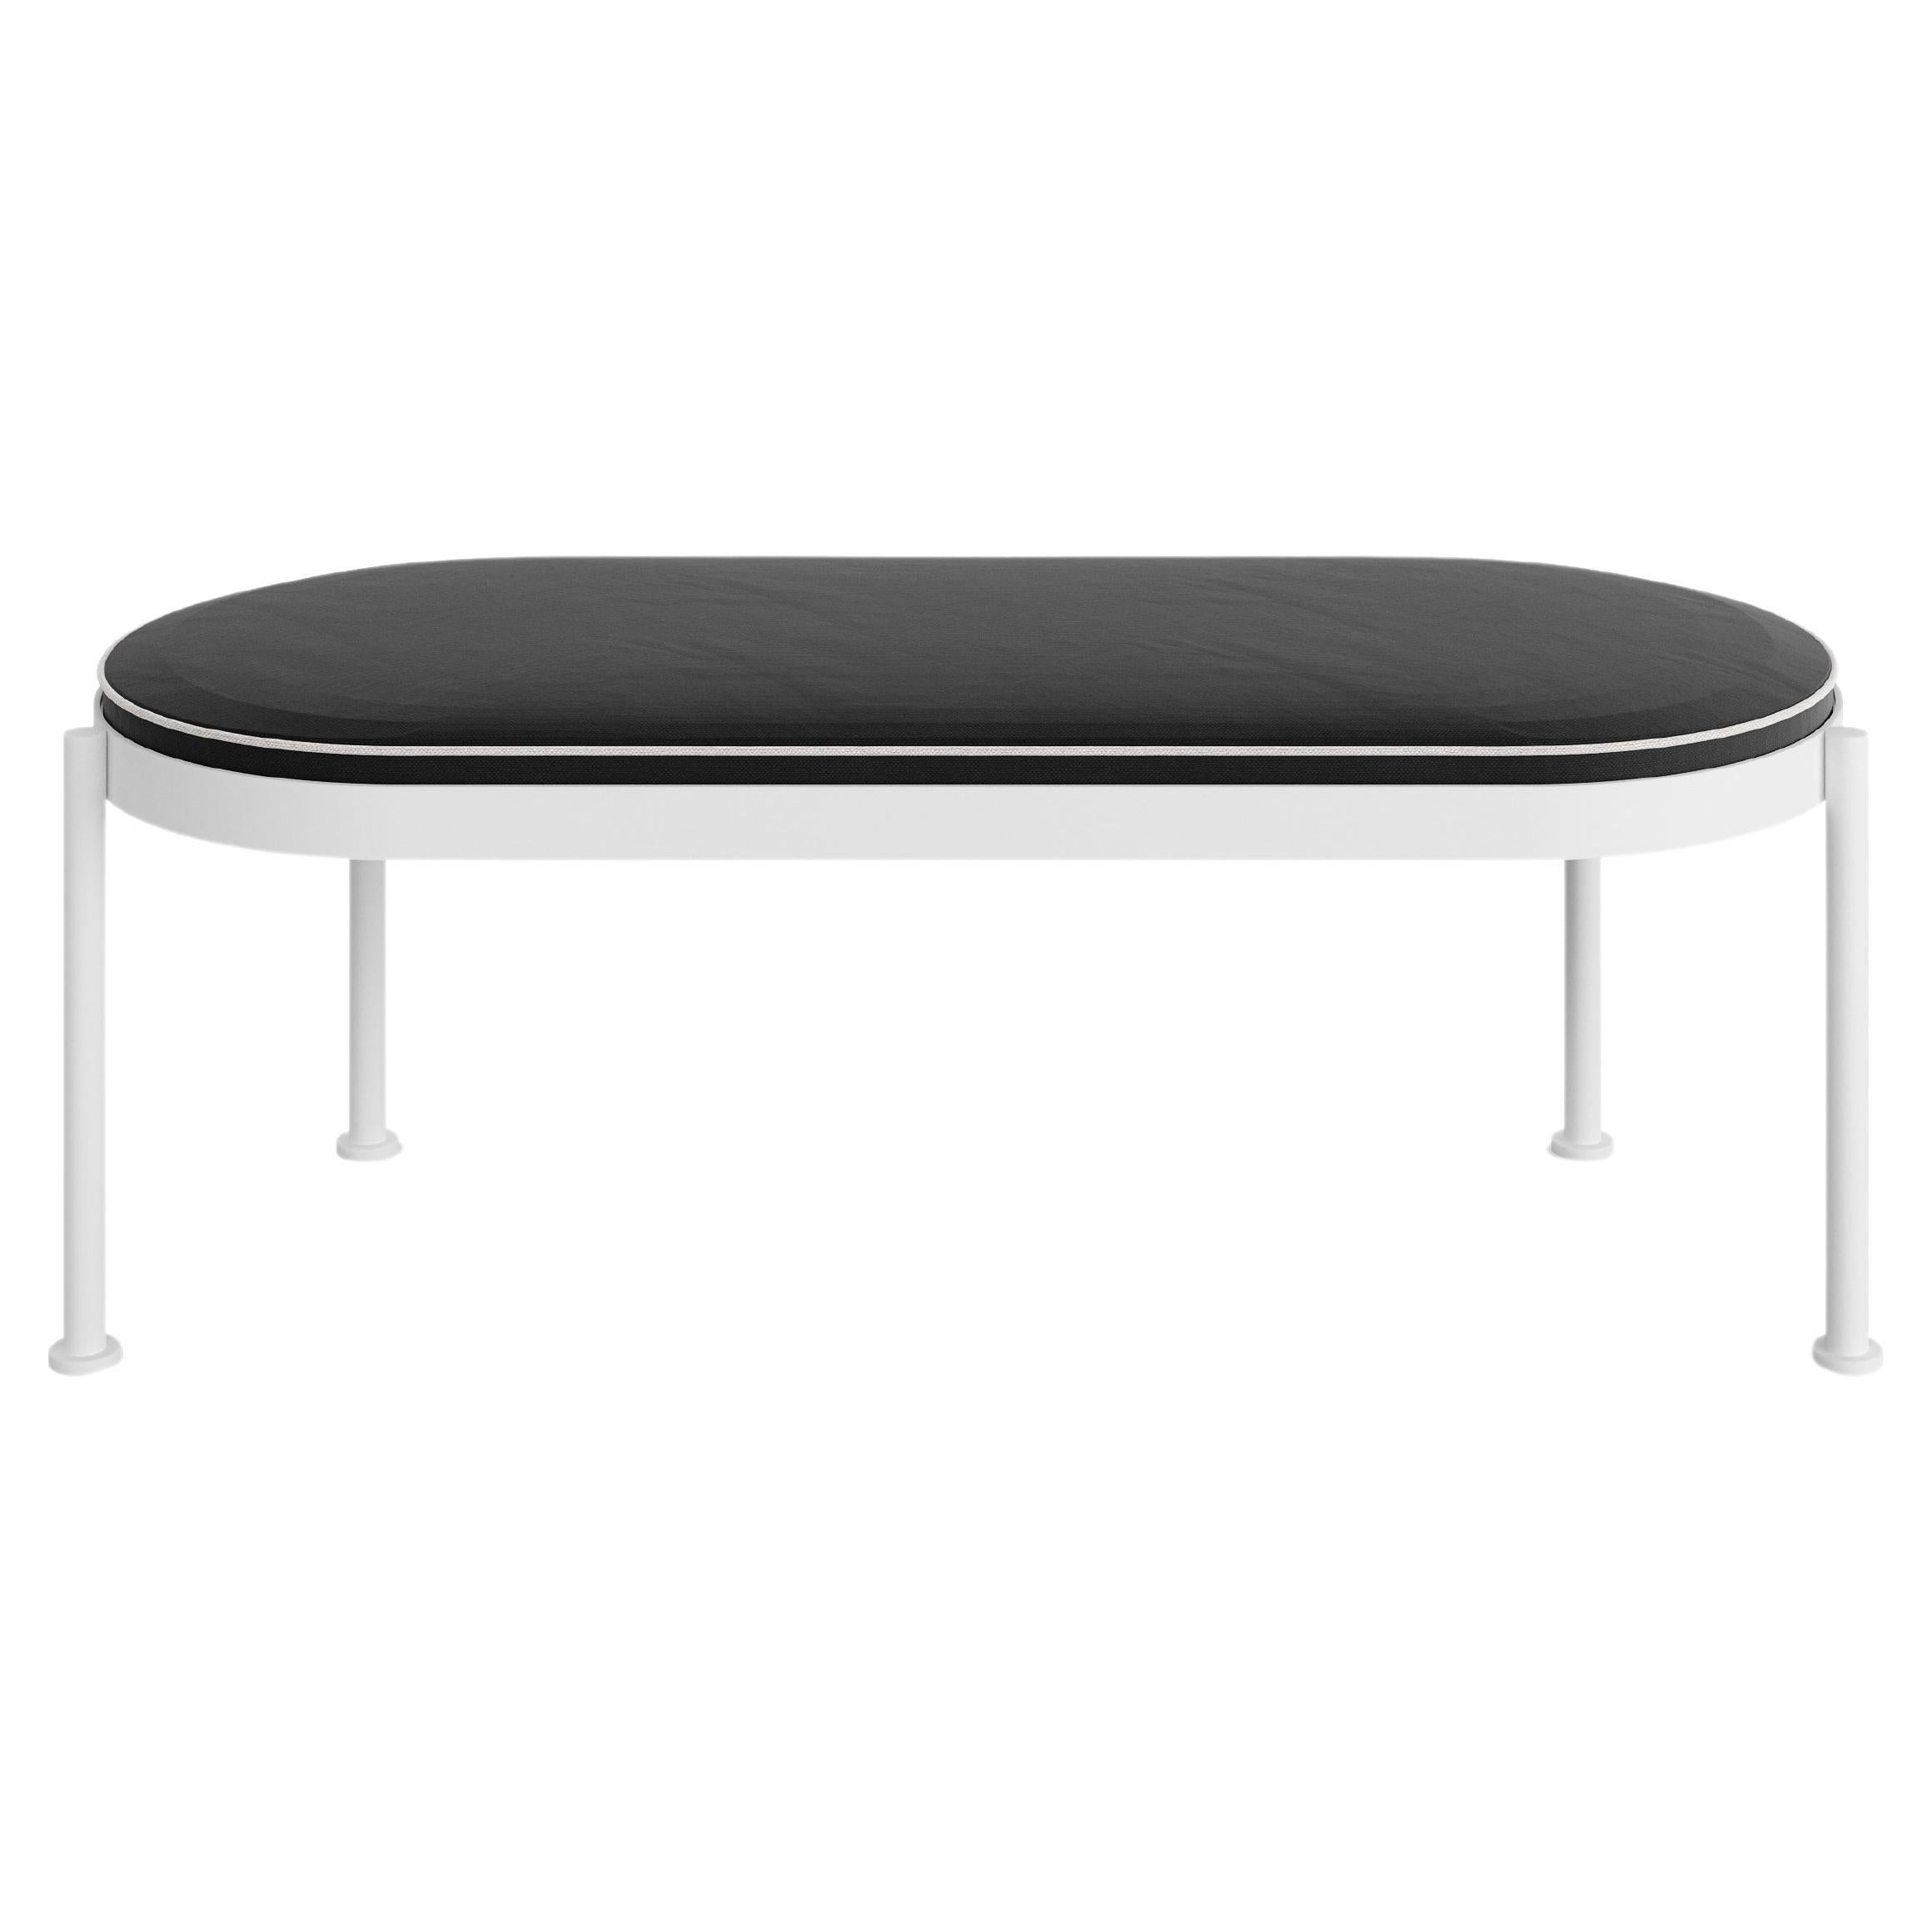 Bench with Back in Black Stainless Steel and Black Water-Resistant Fabric